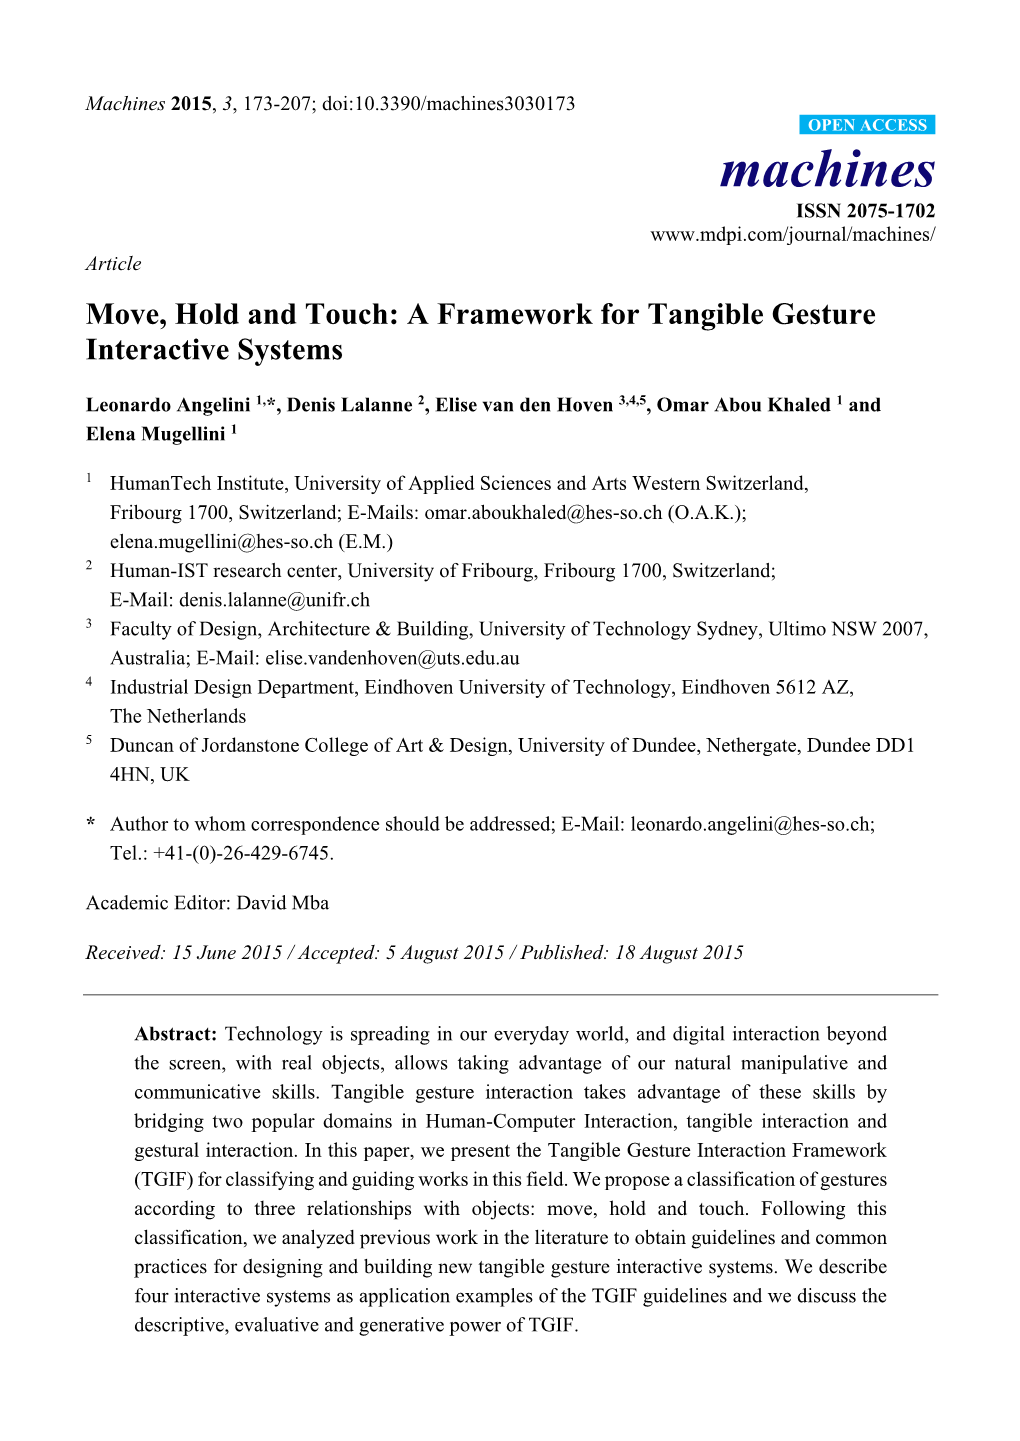 A Framework for Tangible Gesture Interactive Systems